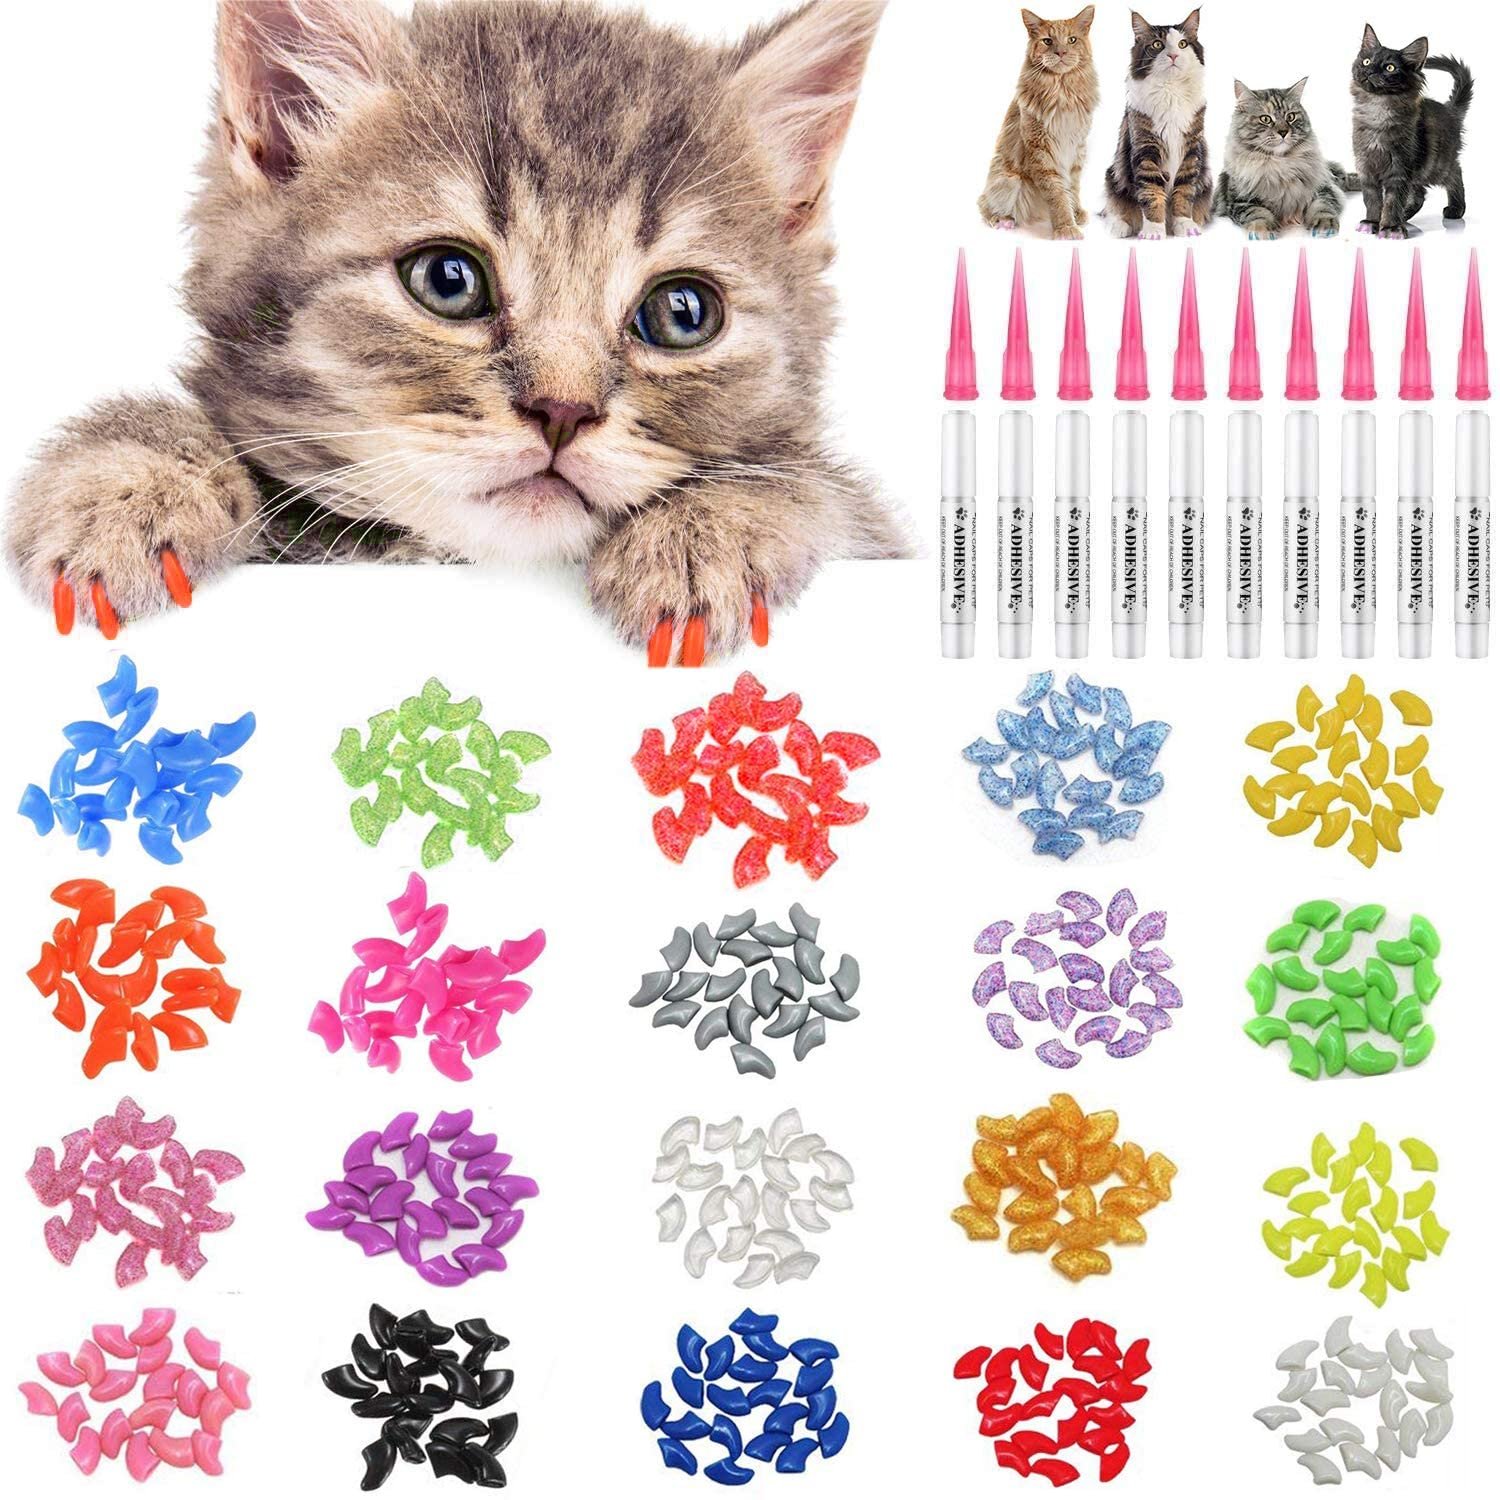 The 5 Best Nail Caps for Cats—We Tested Them All In 2024 